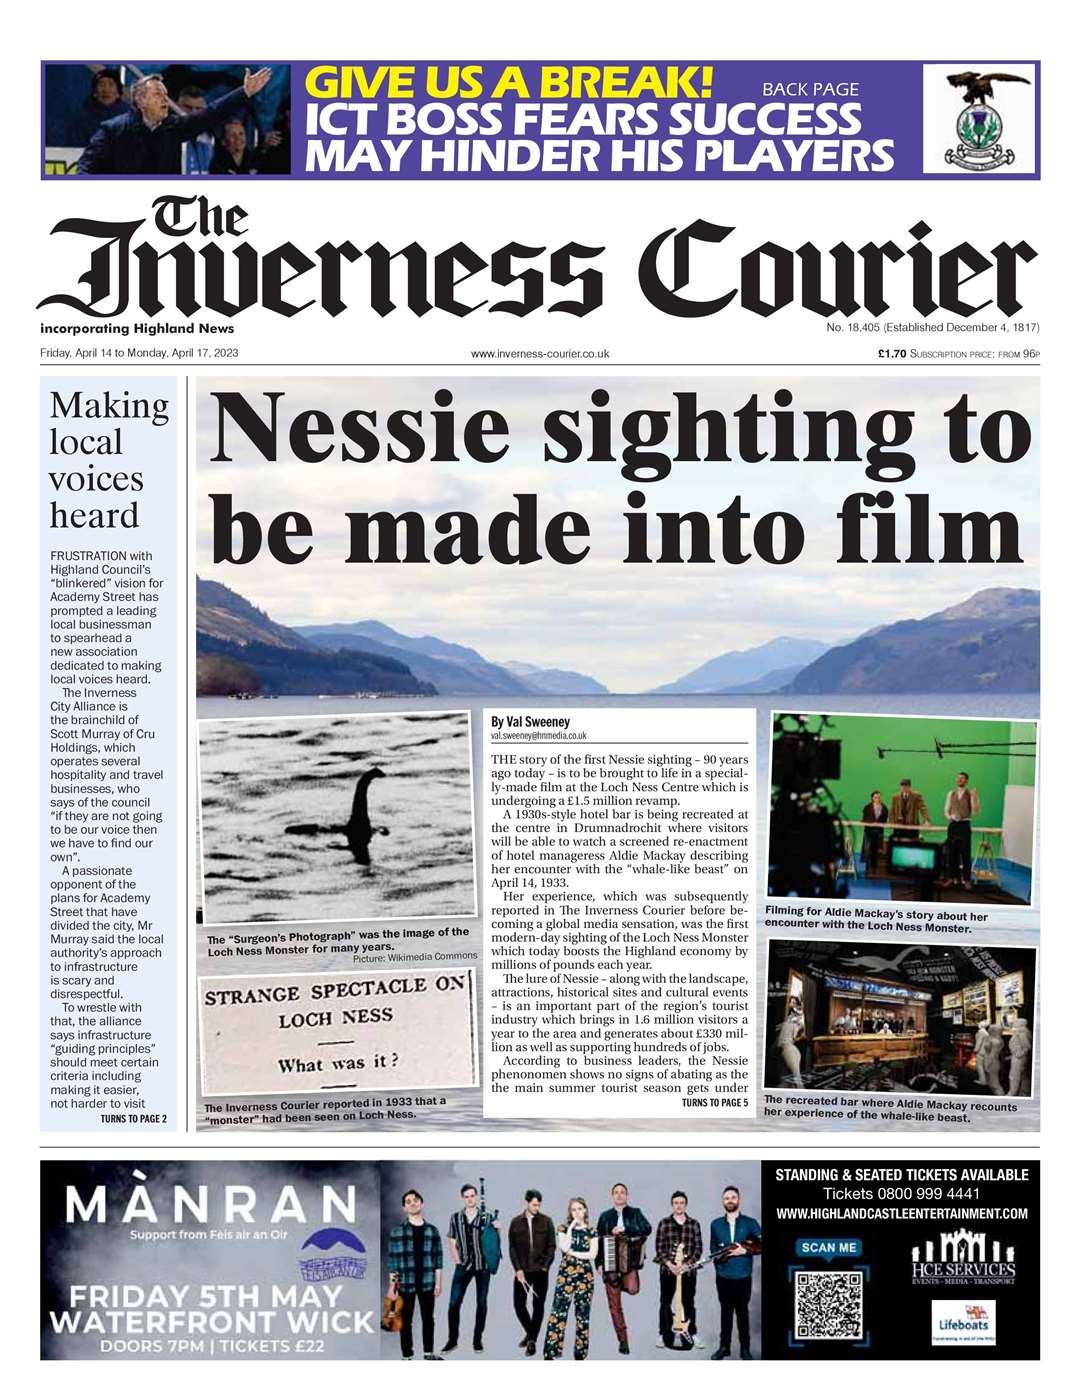 The Inverness Courier, April 14, front page.